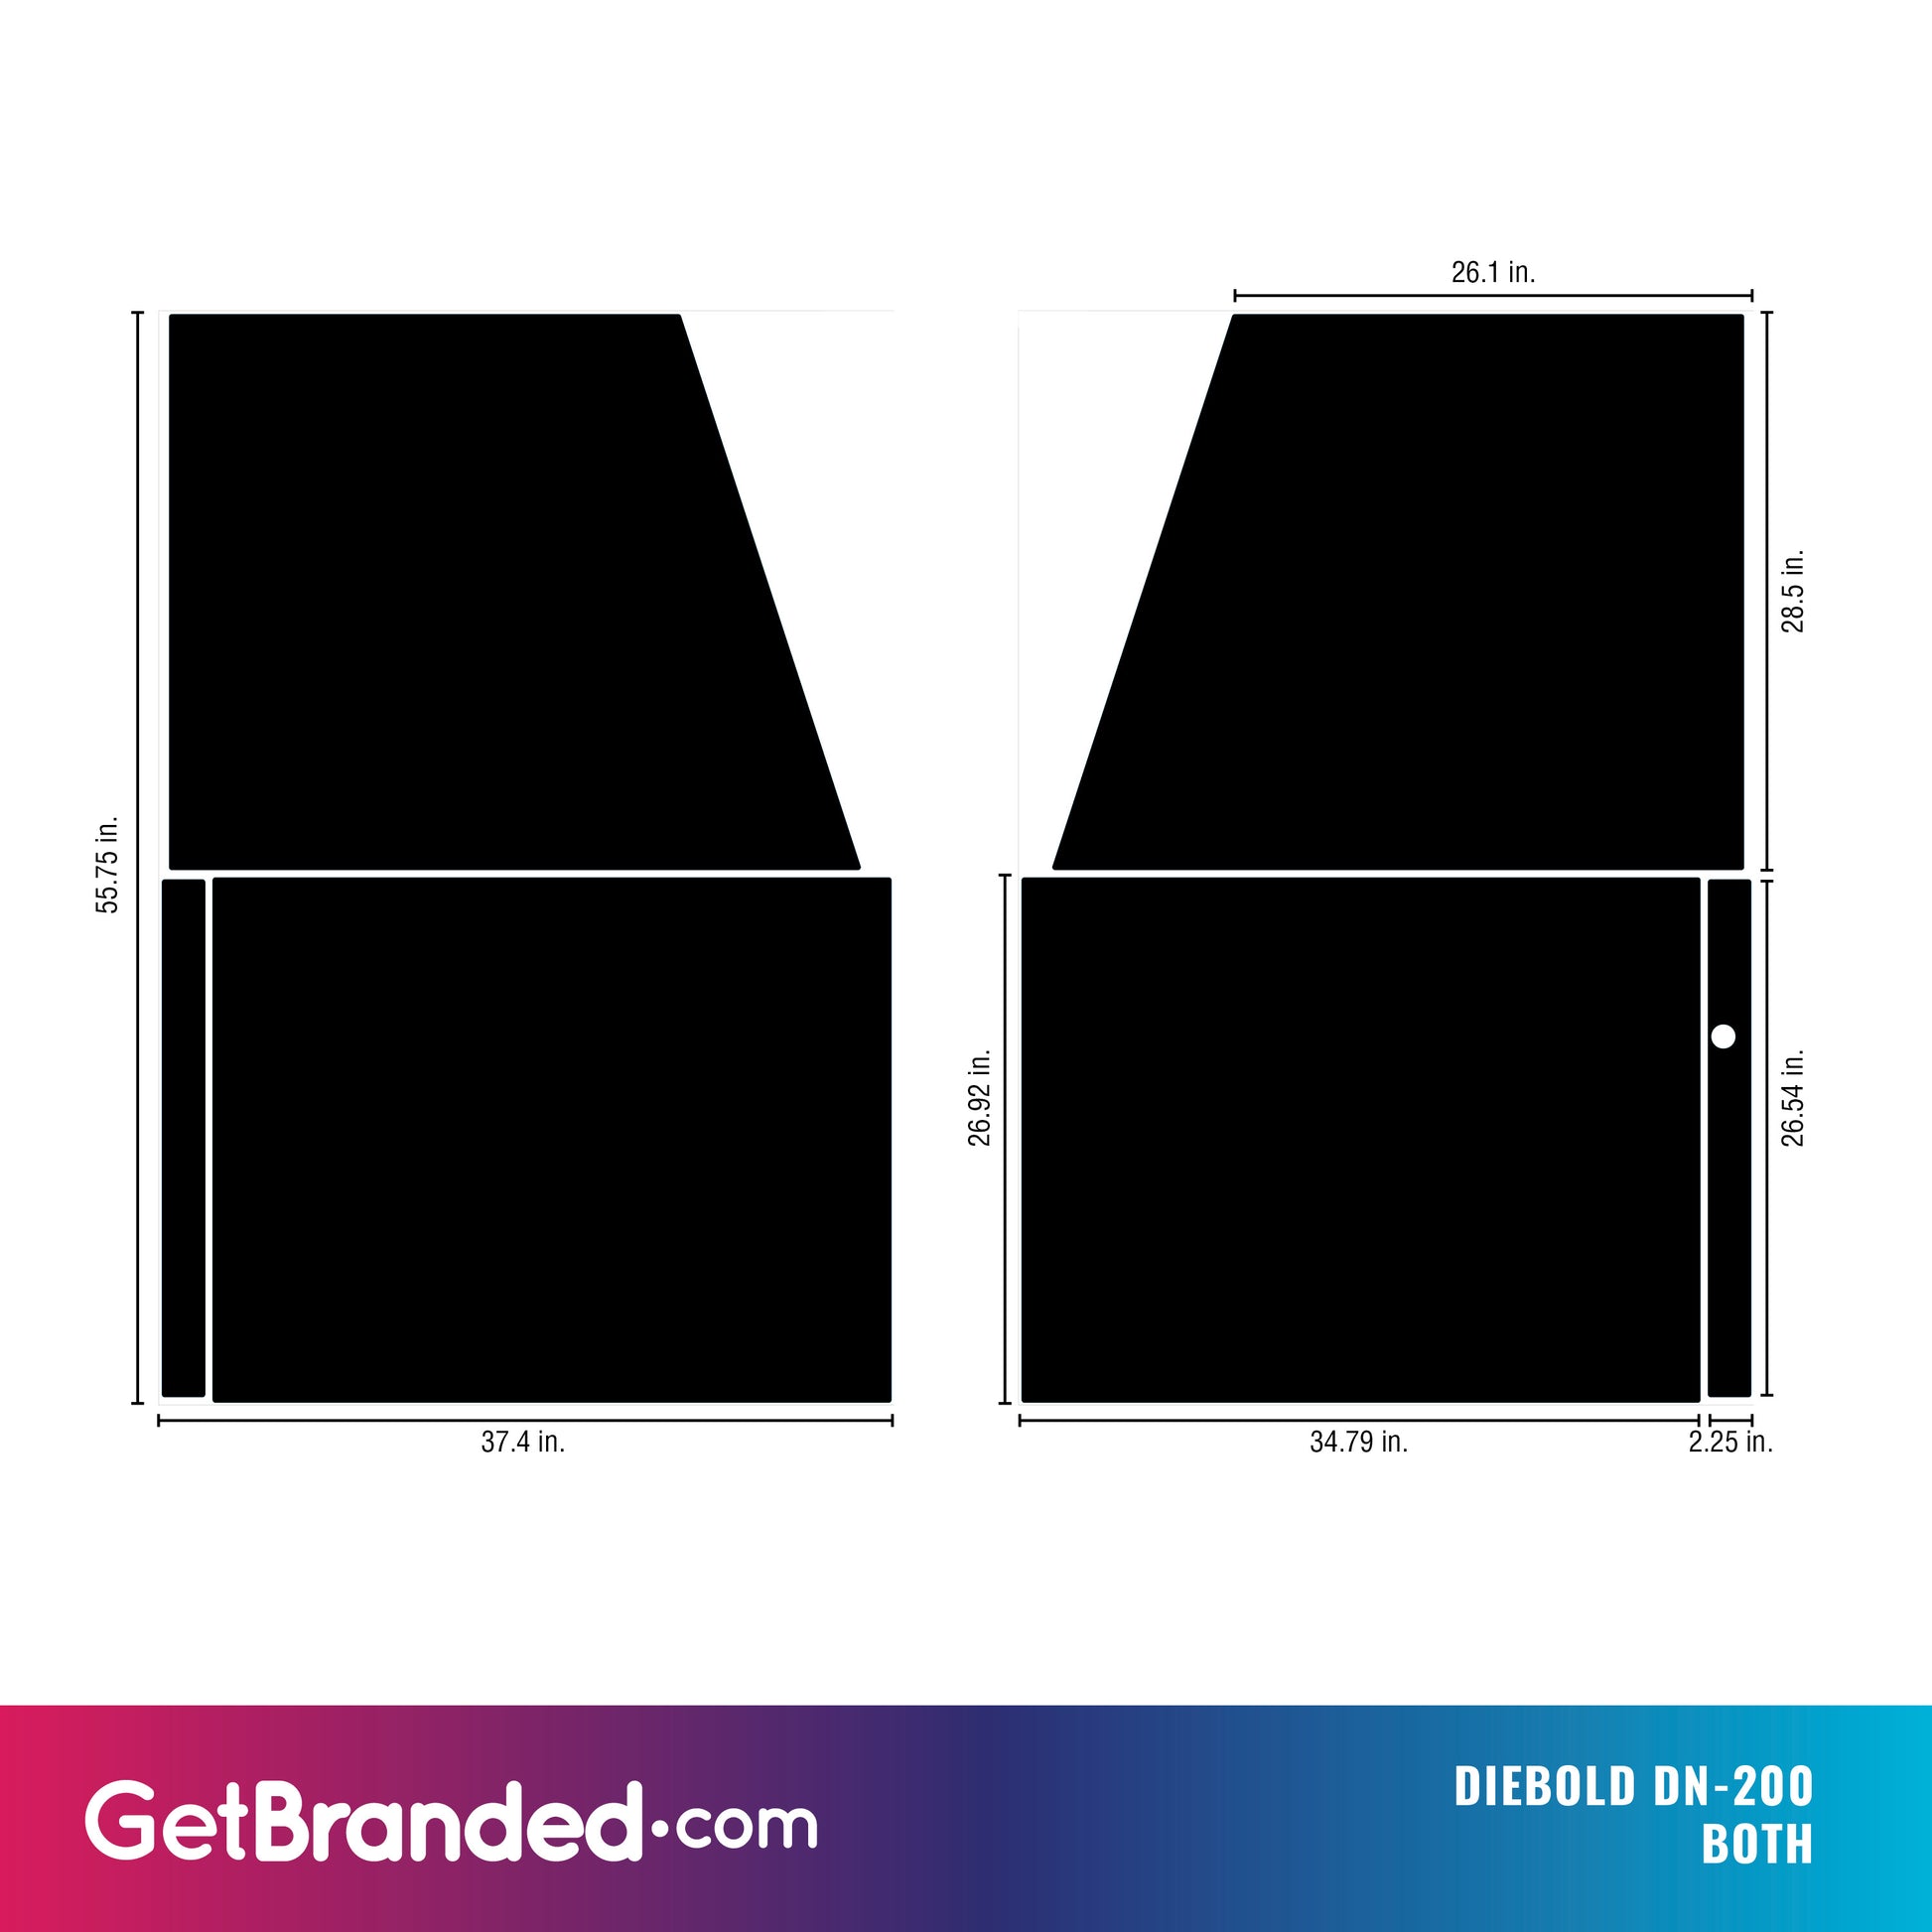 Diebold DN-200 both side panels dimensions